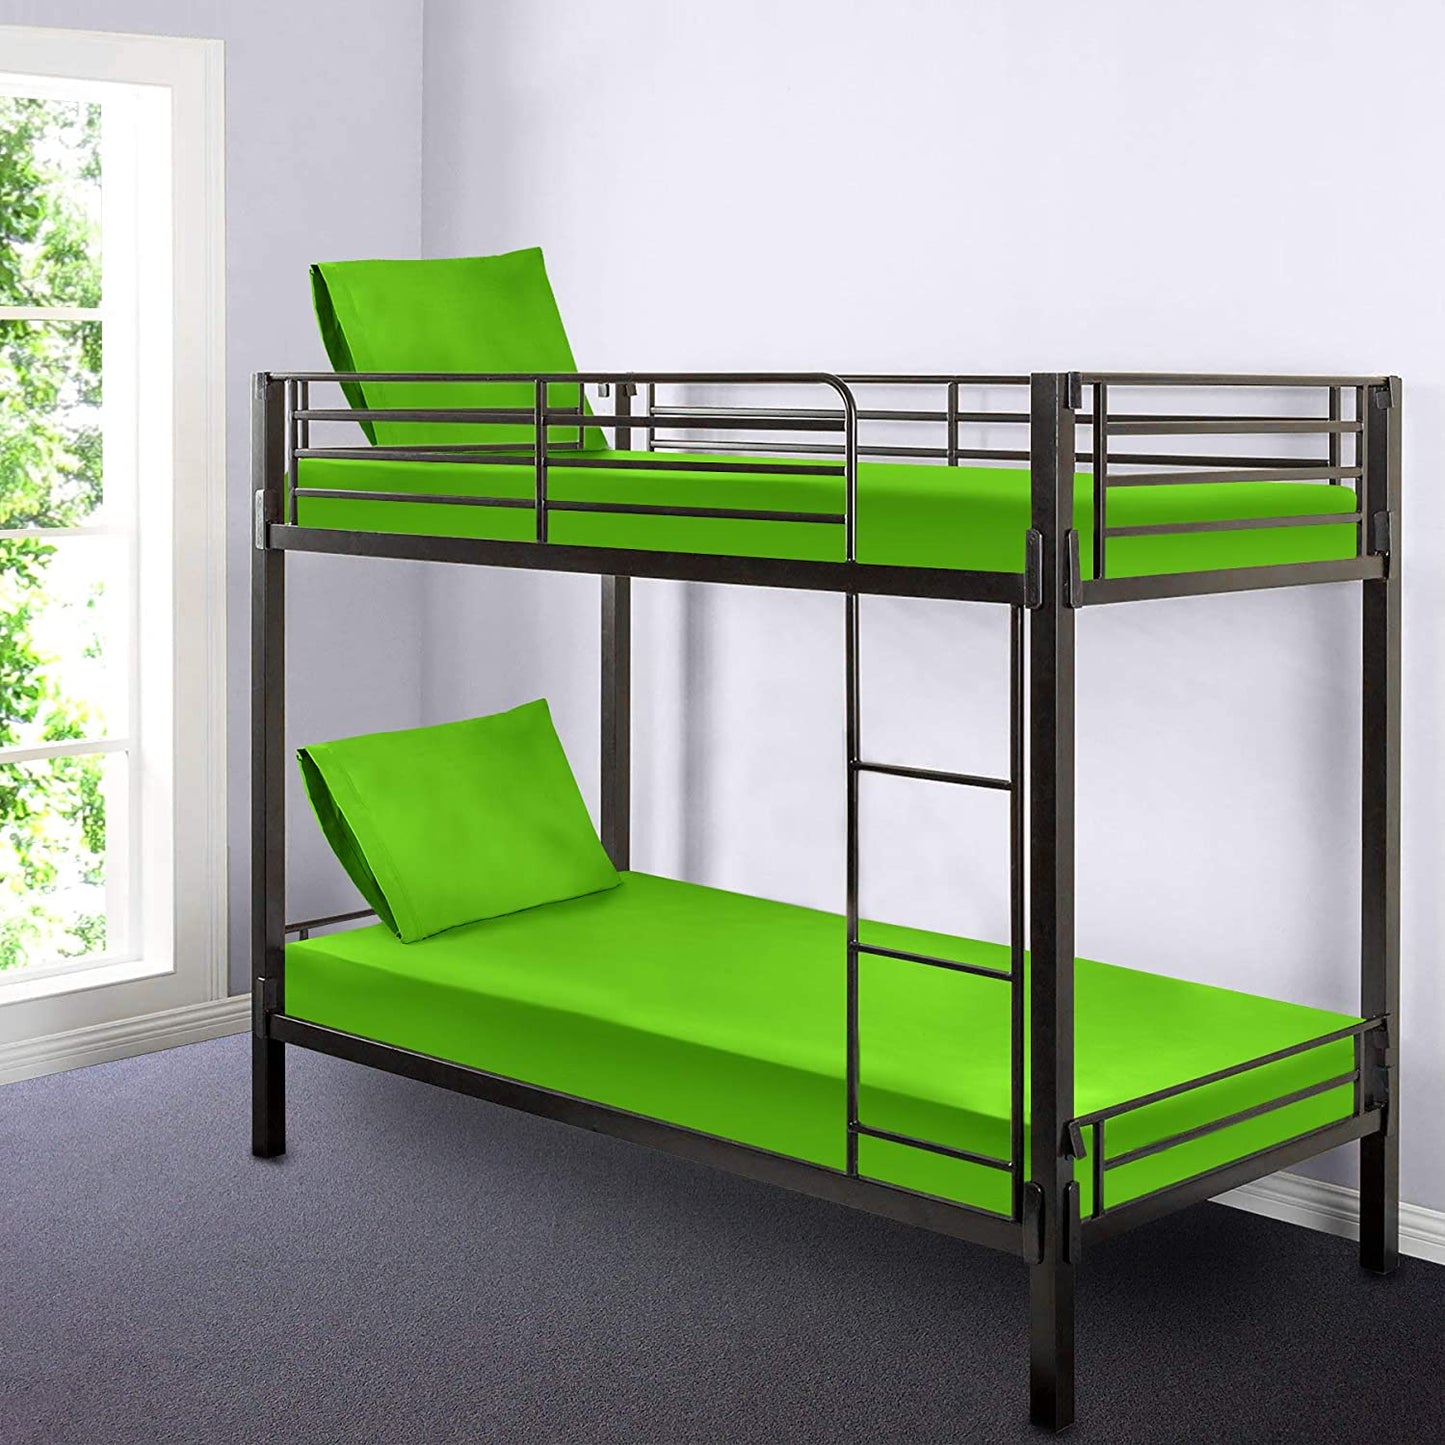 Gilbins 30" x 75" Cot Size 2-Piece Bed Sheet Set, Made of Ultra Soft Cotton, Perfect for Camp Bunk Beds/RVs/Guest Beds (Neon Green)